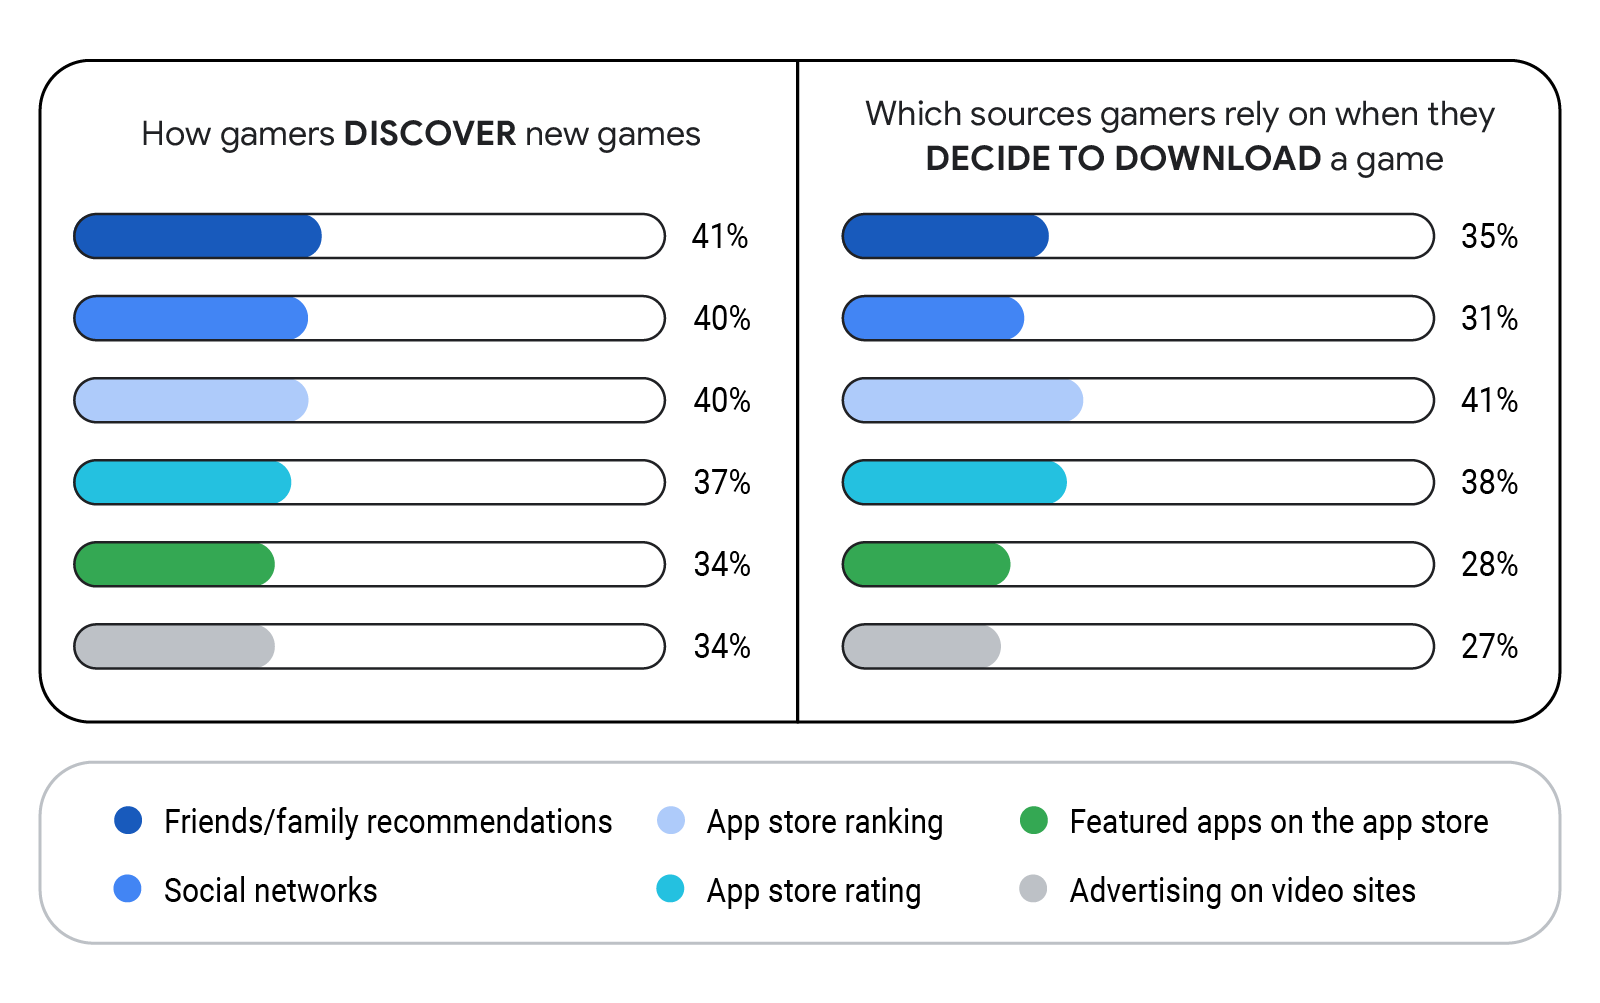 Mobile Games vs PC Games: Decoding Gaming Preferences